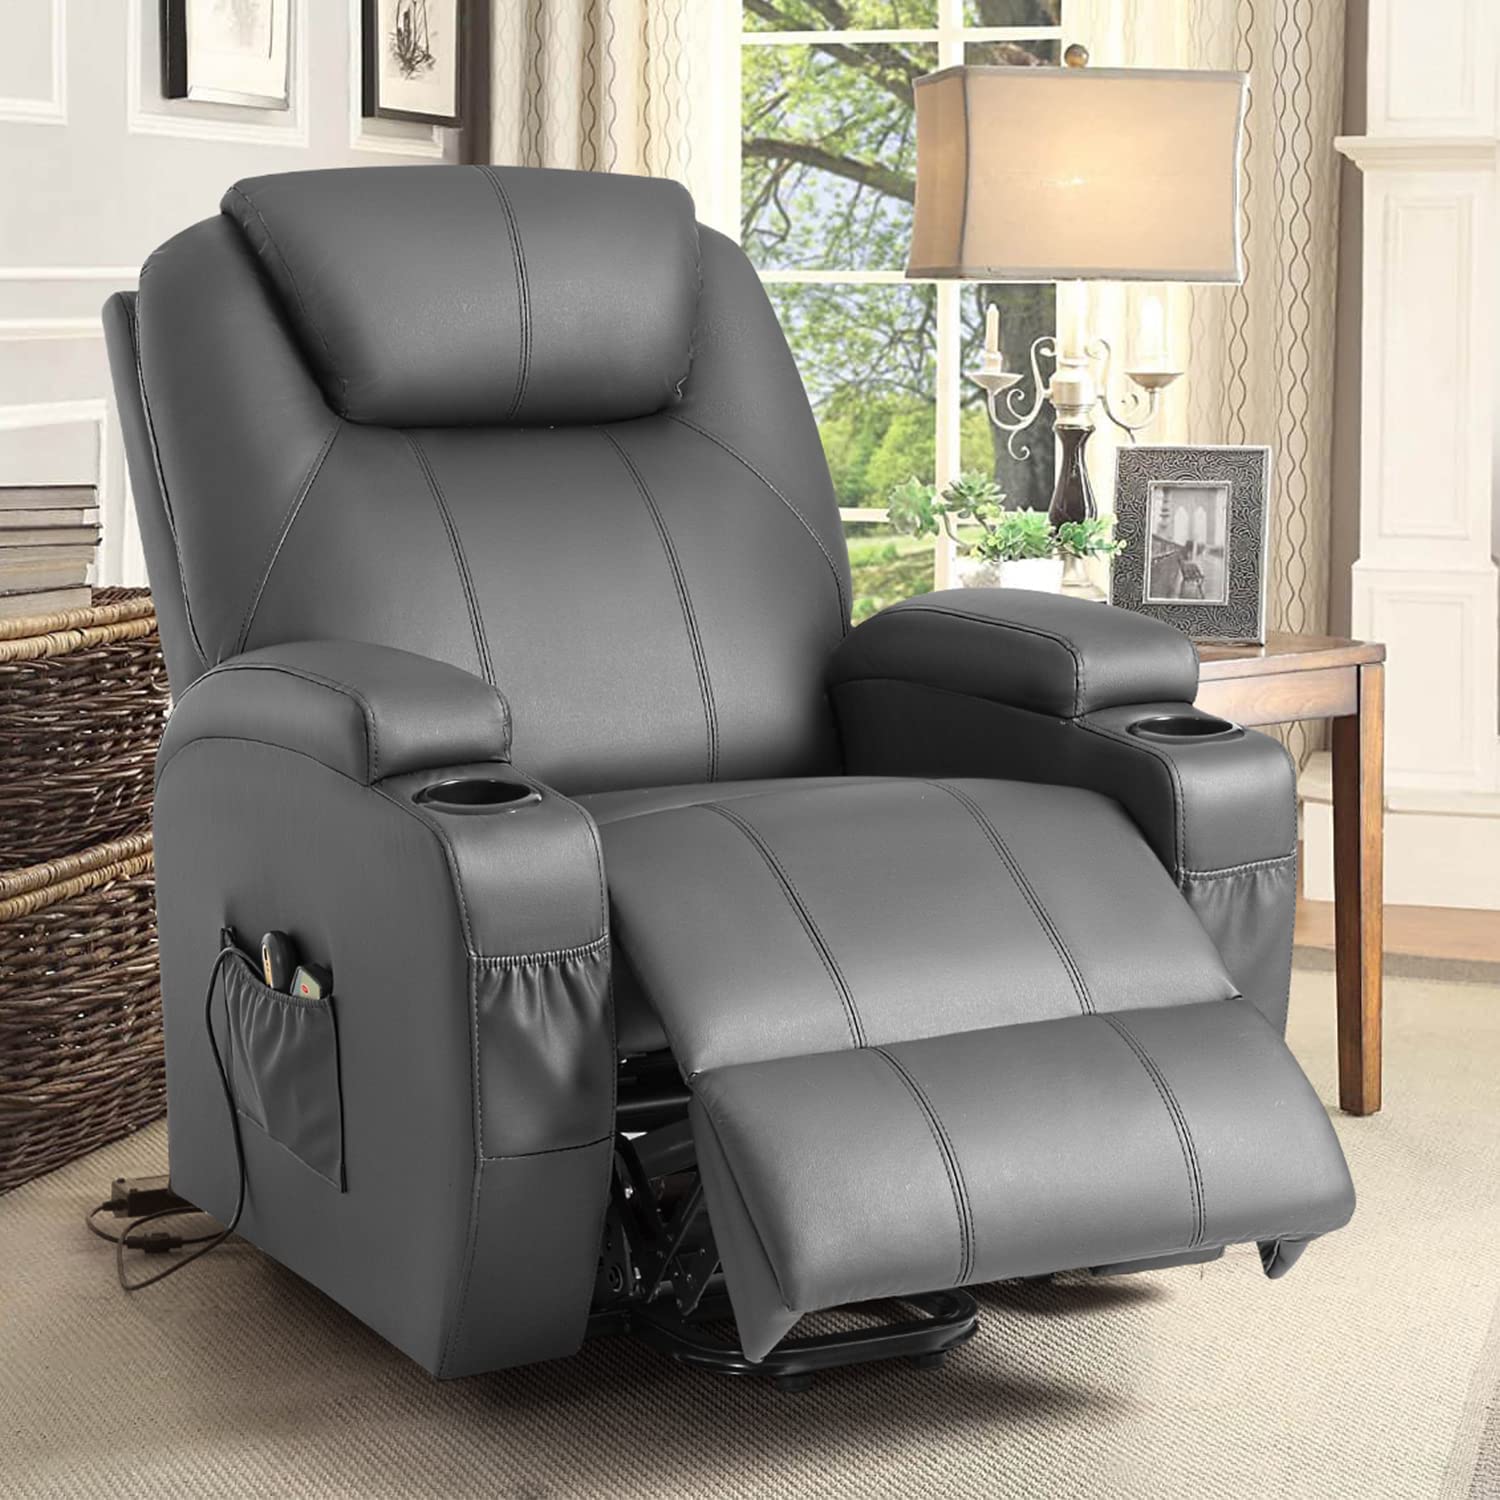 GRAY Reclining Lift Chair - Yeshomy - Wasatch Medical Supply